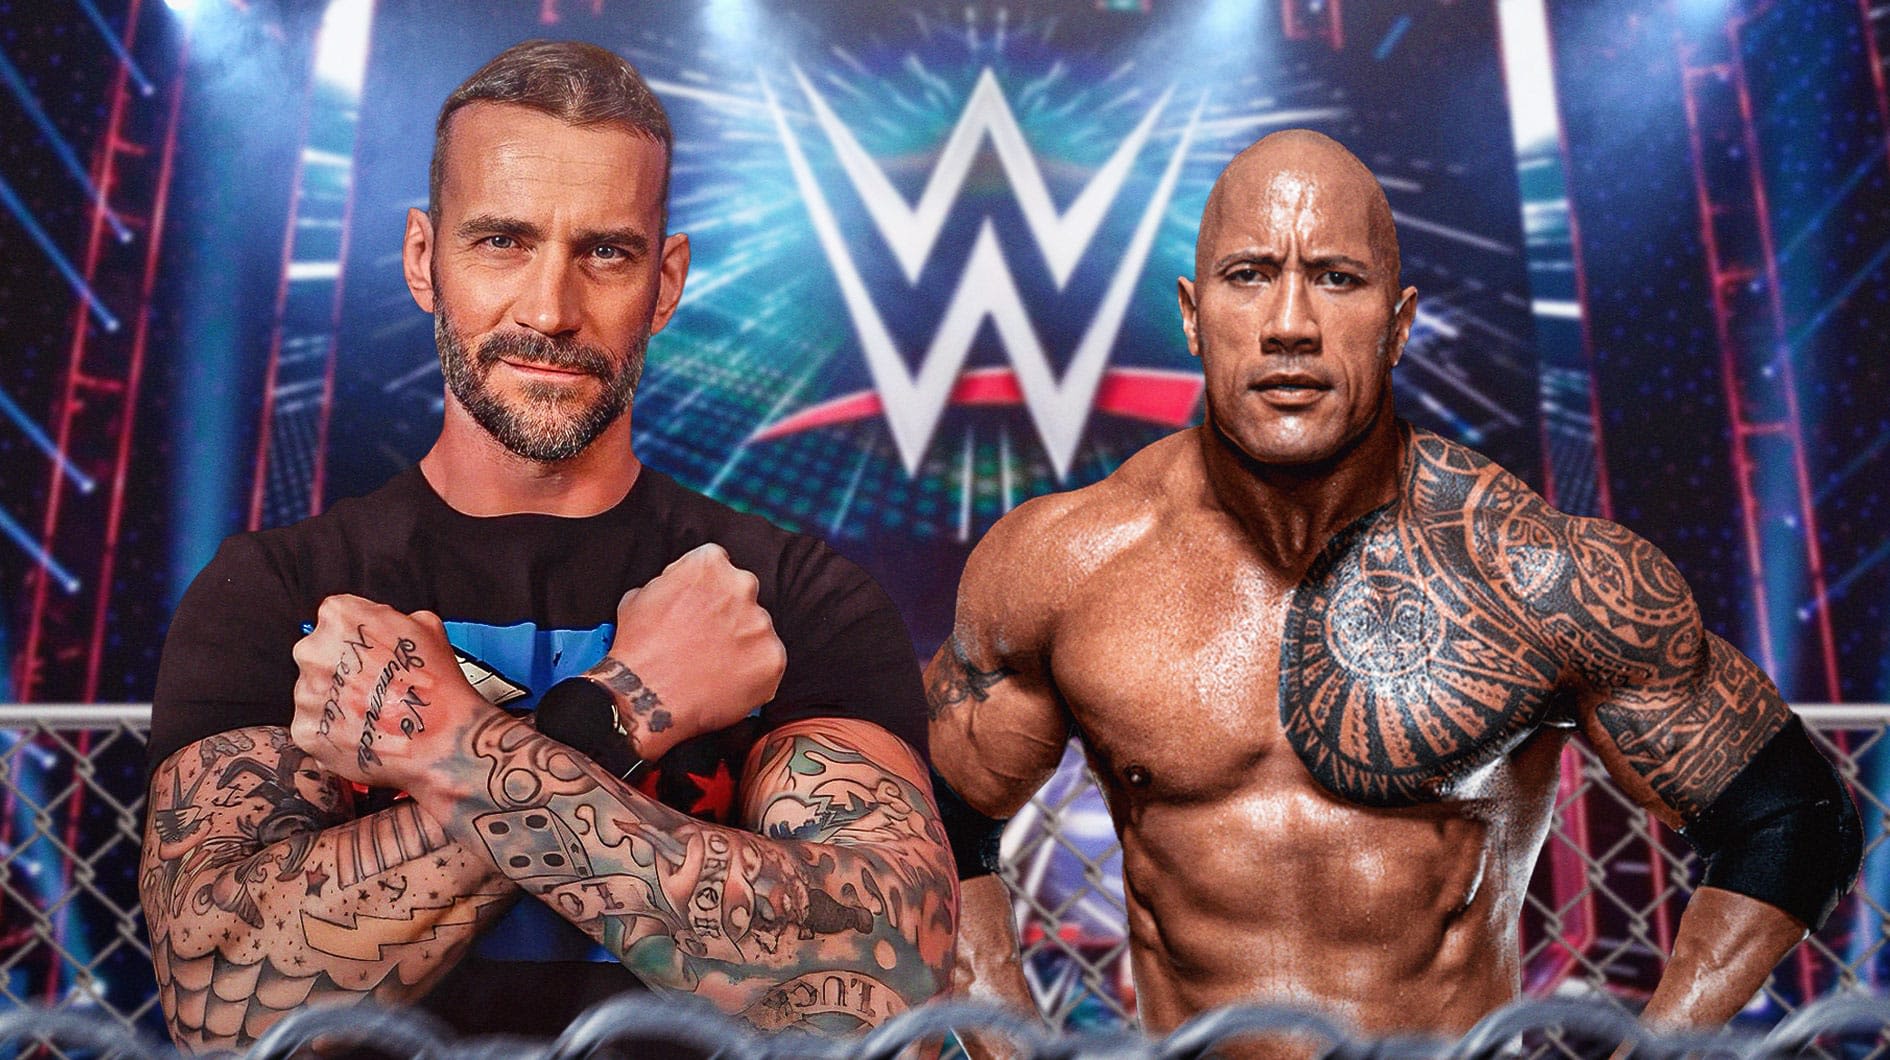 CM Punk earns an unlikely comparison to The Rock from this WWE Superstar